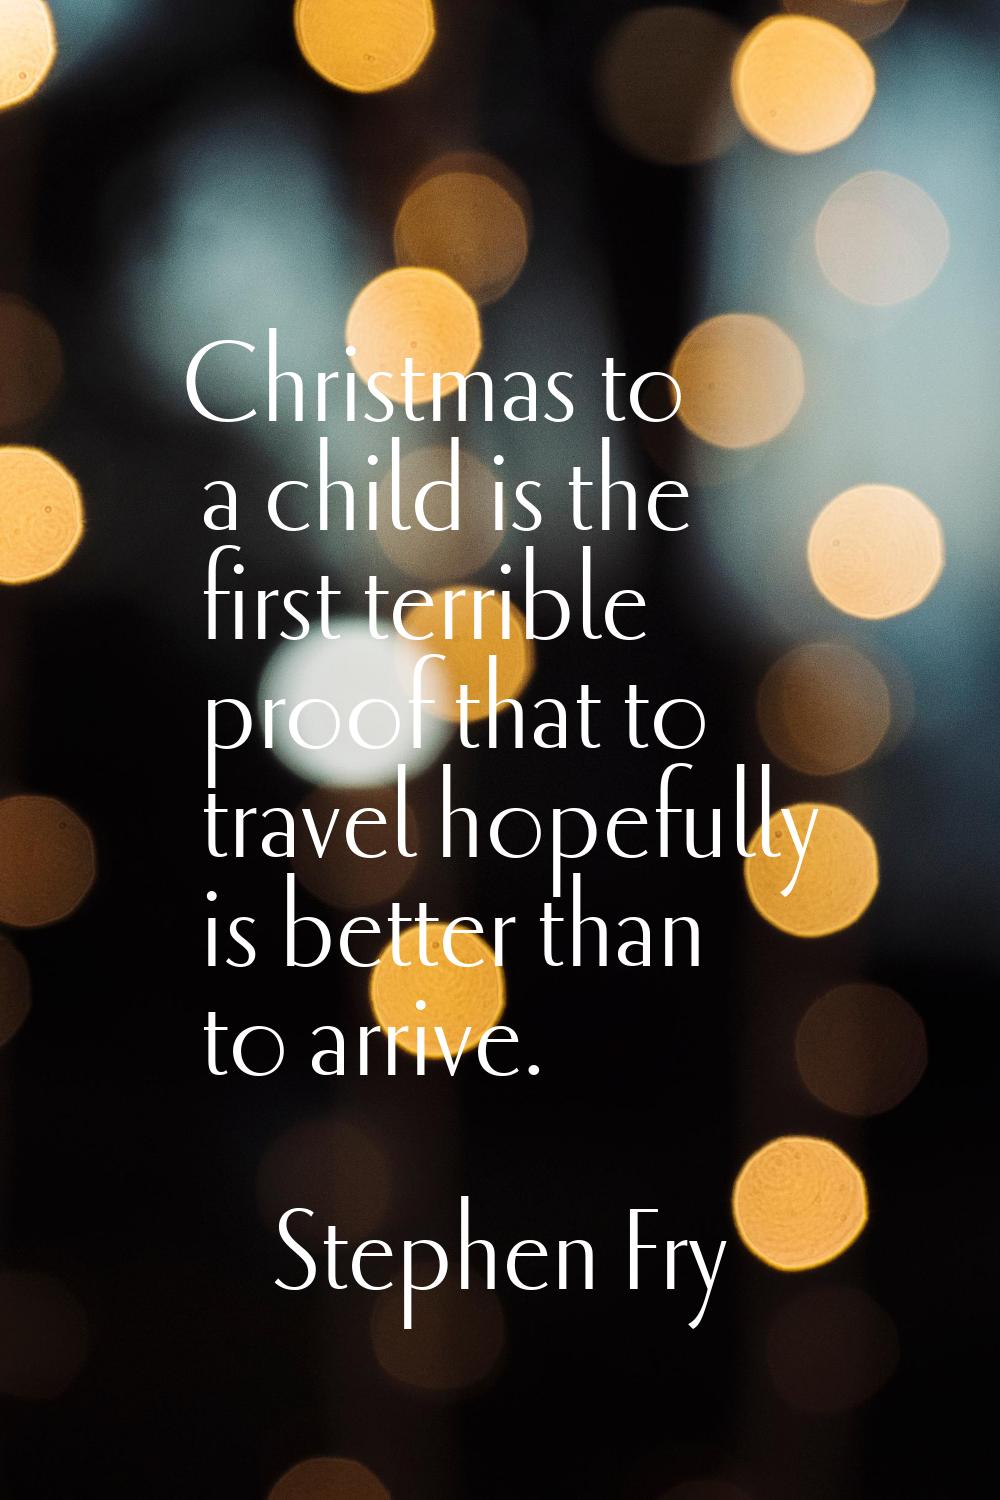 Christmas to a child is the first terrible proof that to travel hopefully is better than to arrive.